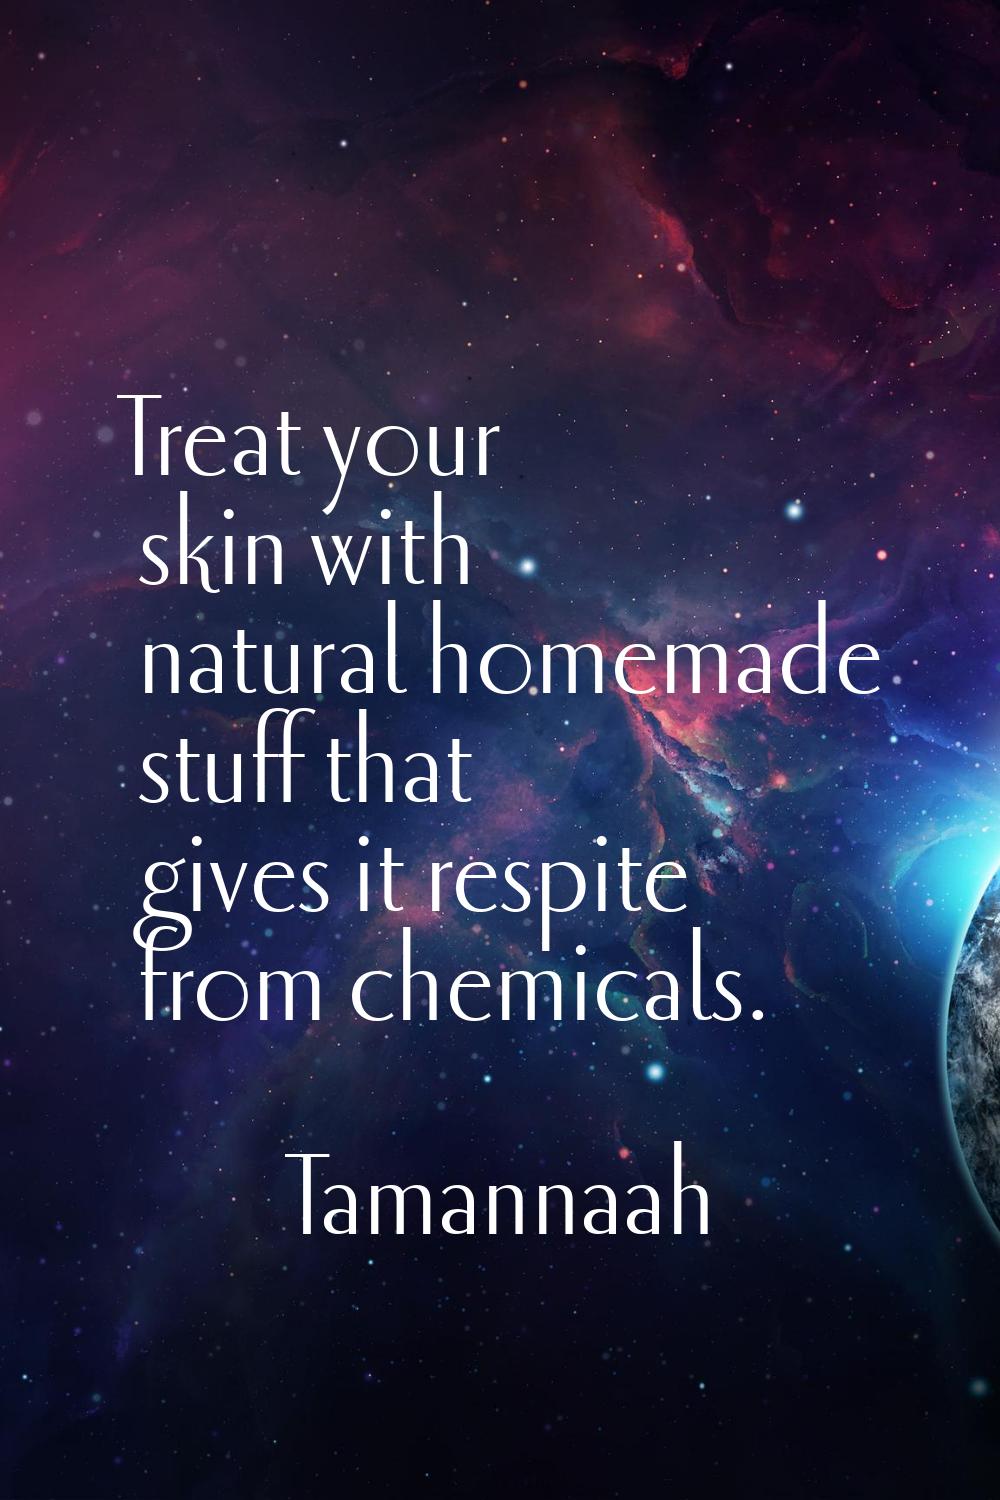 Treat your skin with natural homemade stuff that gives it respite from chemicals.